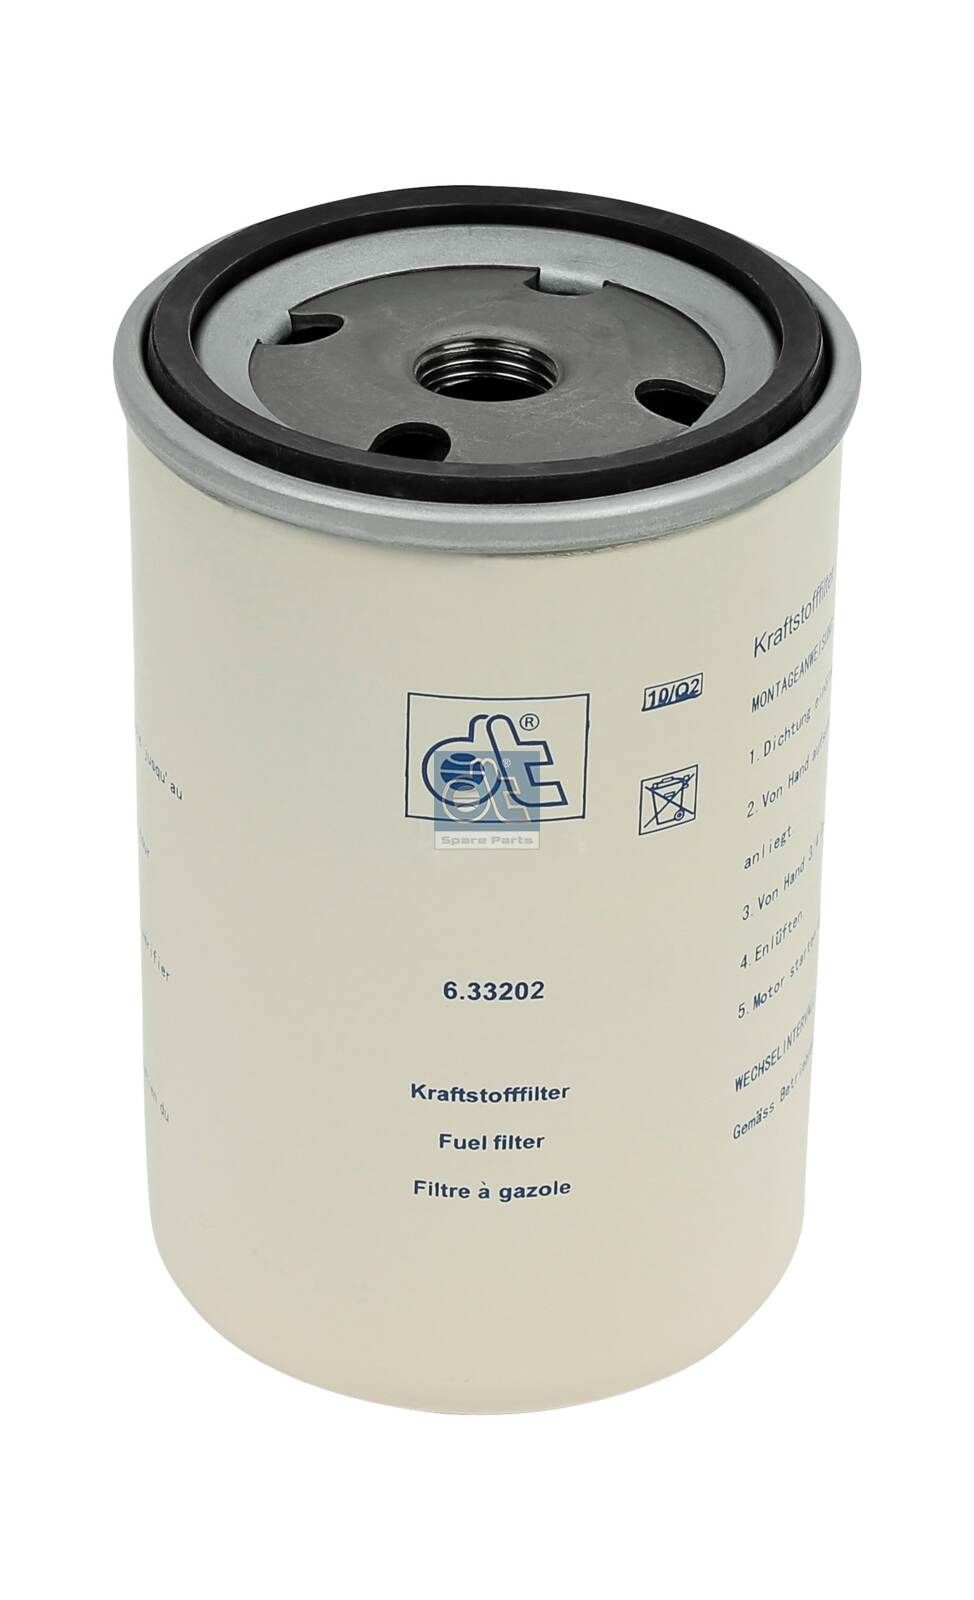 WK 727 DT Spare Parts 6.33202 Fuel filter 40 33 156 710